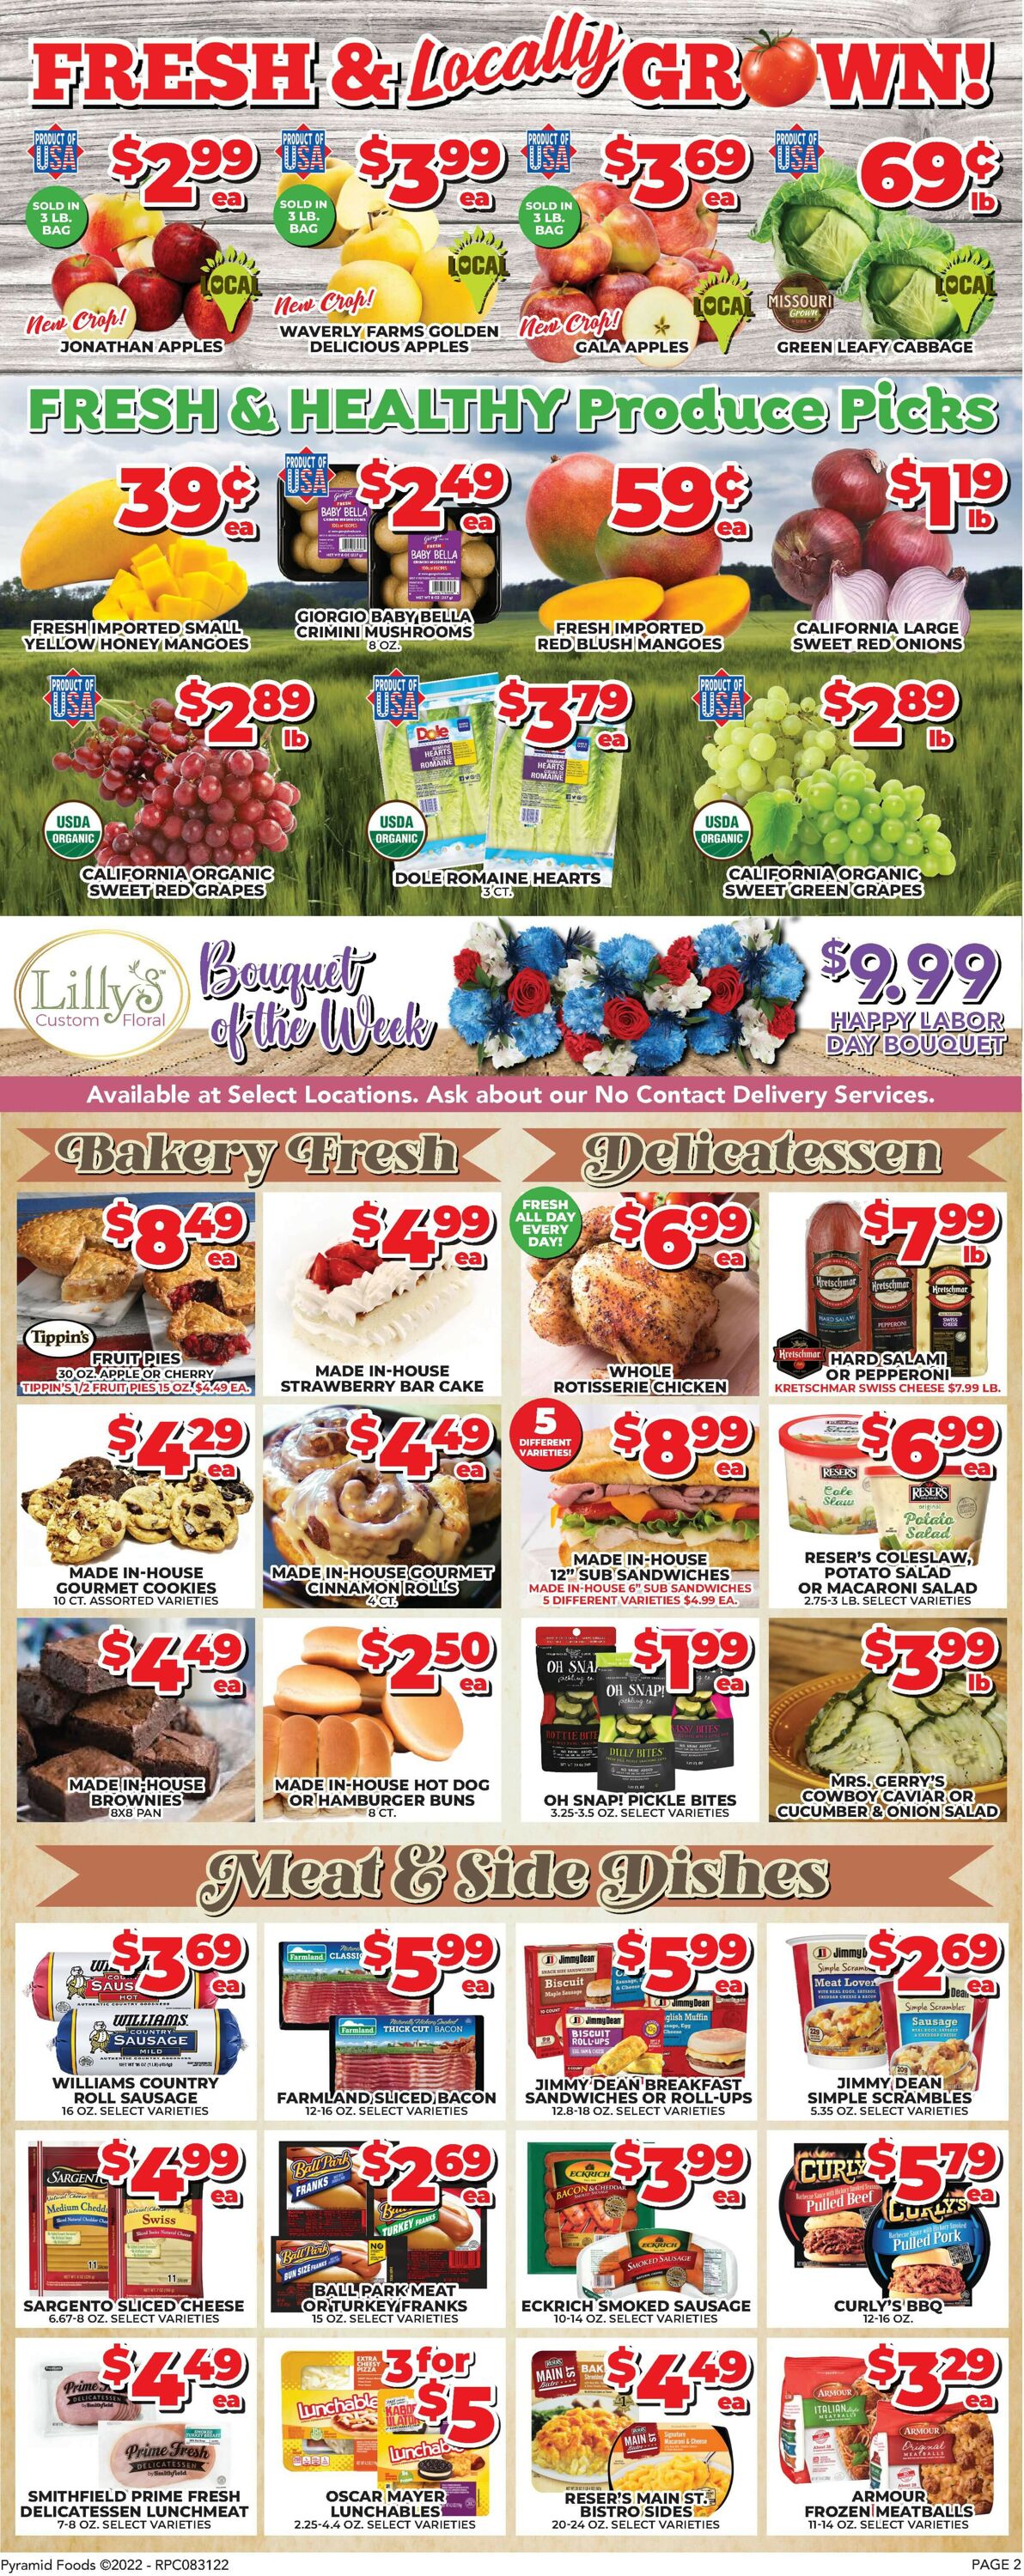 Price Cutter Weekly Ad Circular - valid 08/31-09/06/2022 (Page 2)